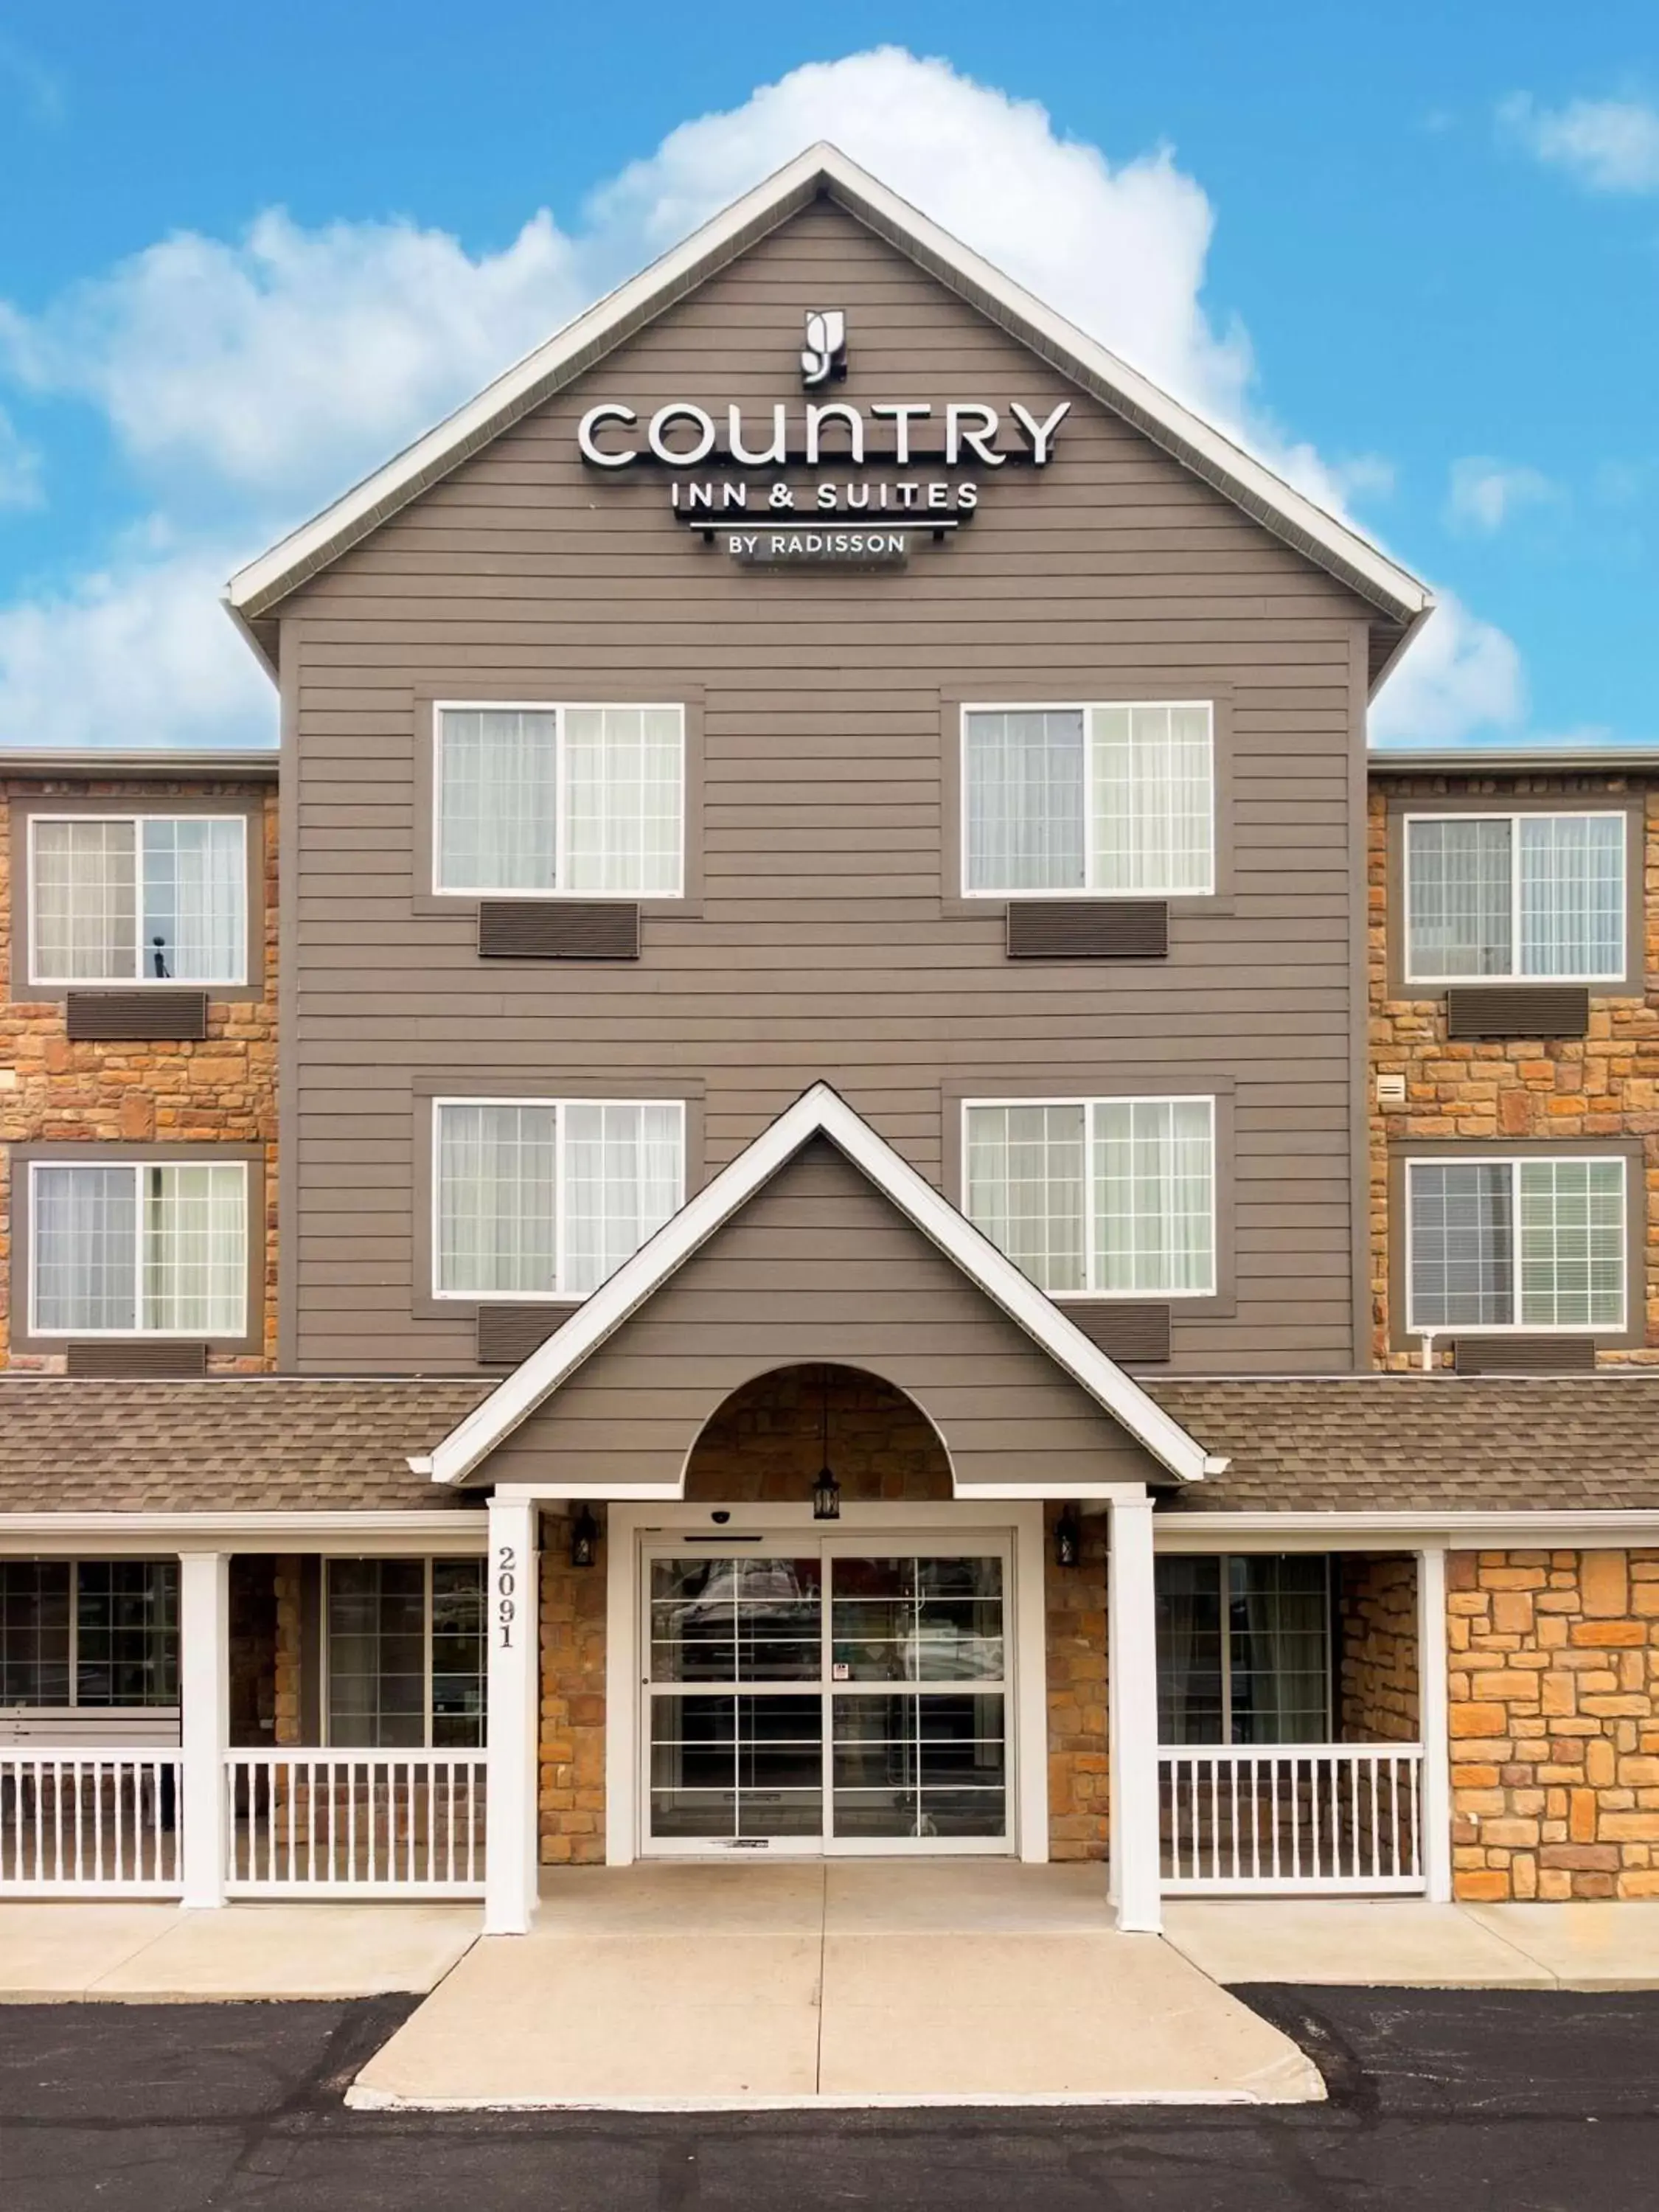 Facade/entrance, Property Building in Country Inn & Suites by Radisson, Marion, OH